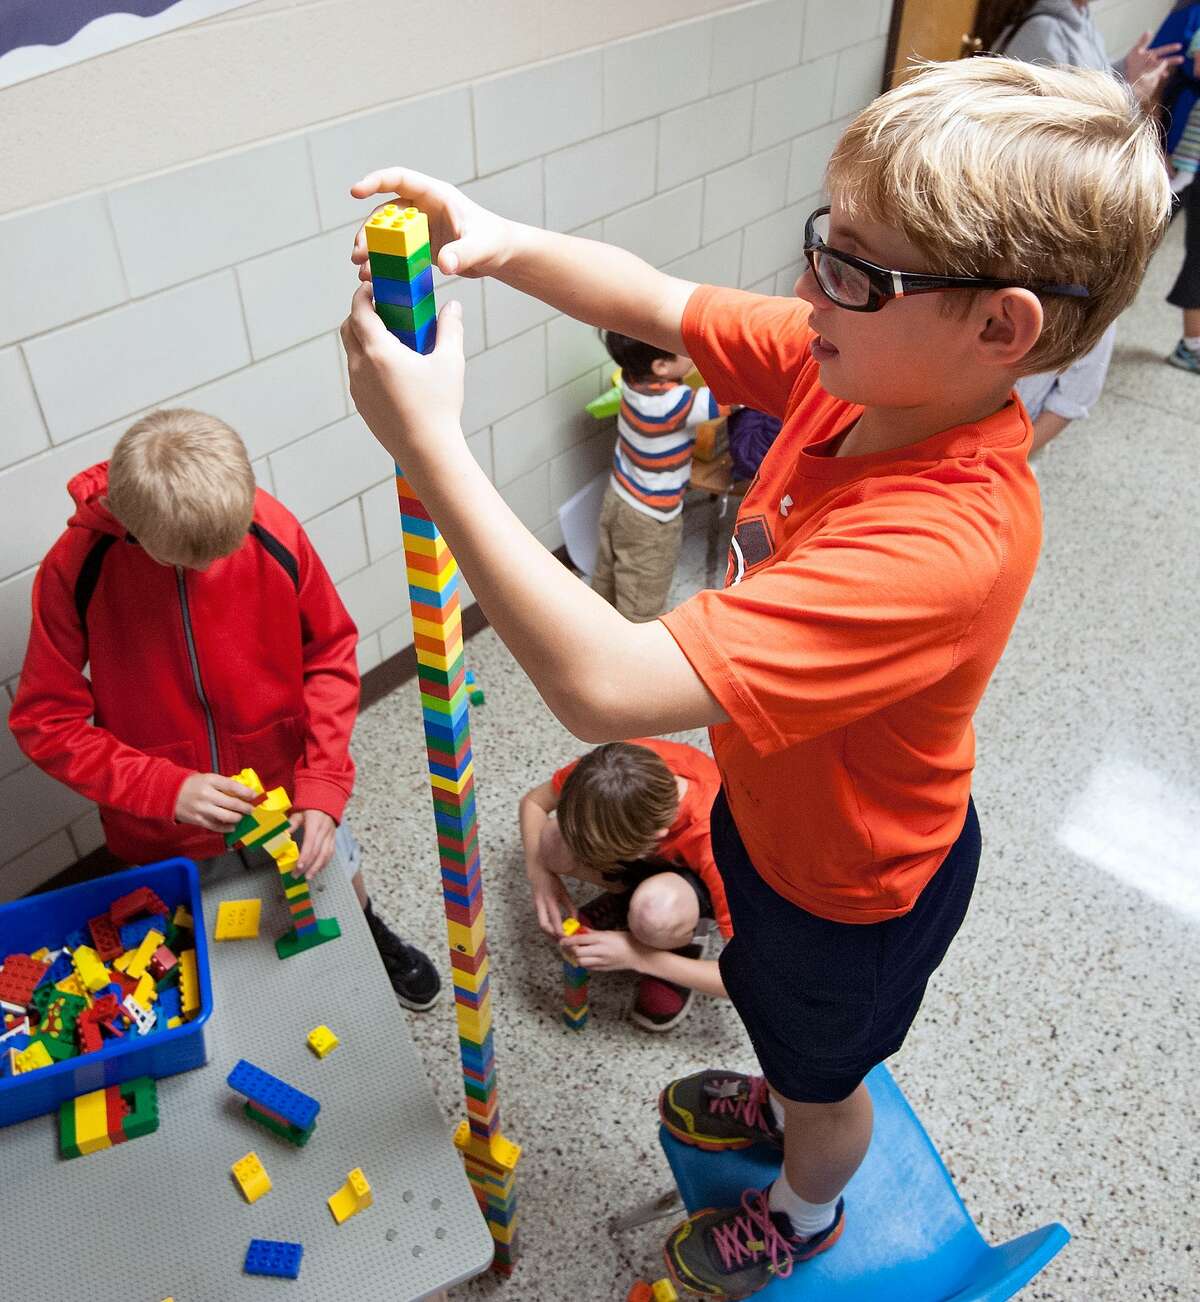 Jax Lassiter, 11, of Bridgewater, precariously adds another Lego to his tower just moments before its collapse during STEAM night (Science, Technology, Engineering, Arts, and Mathematics) at John Wayland Elementary School in Bridgewater, Va., on Thursday night, Oct. 16, 2014. (AP Photo/The Daily News-Record, Jason Lenhart)